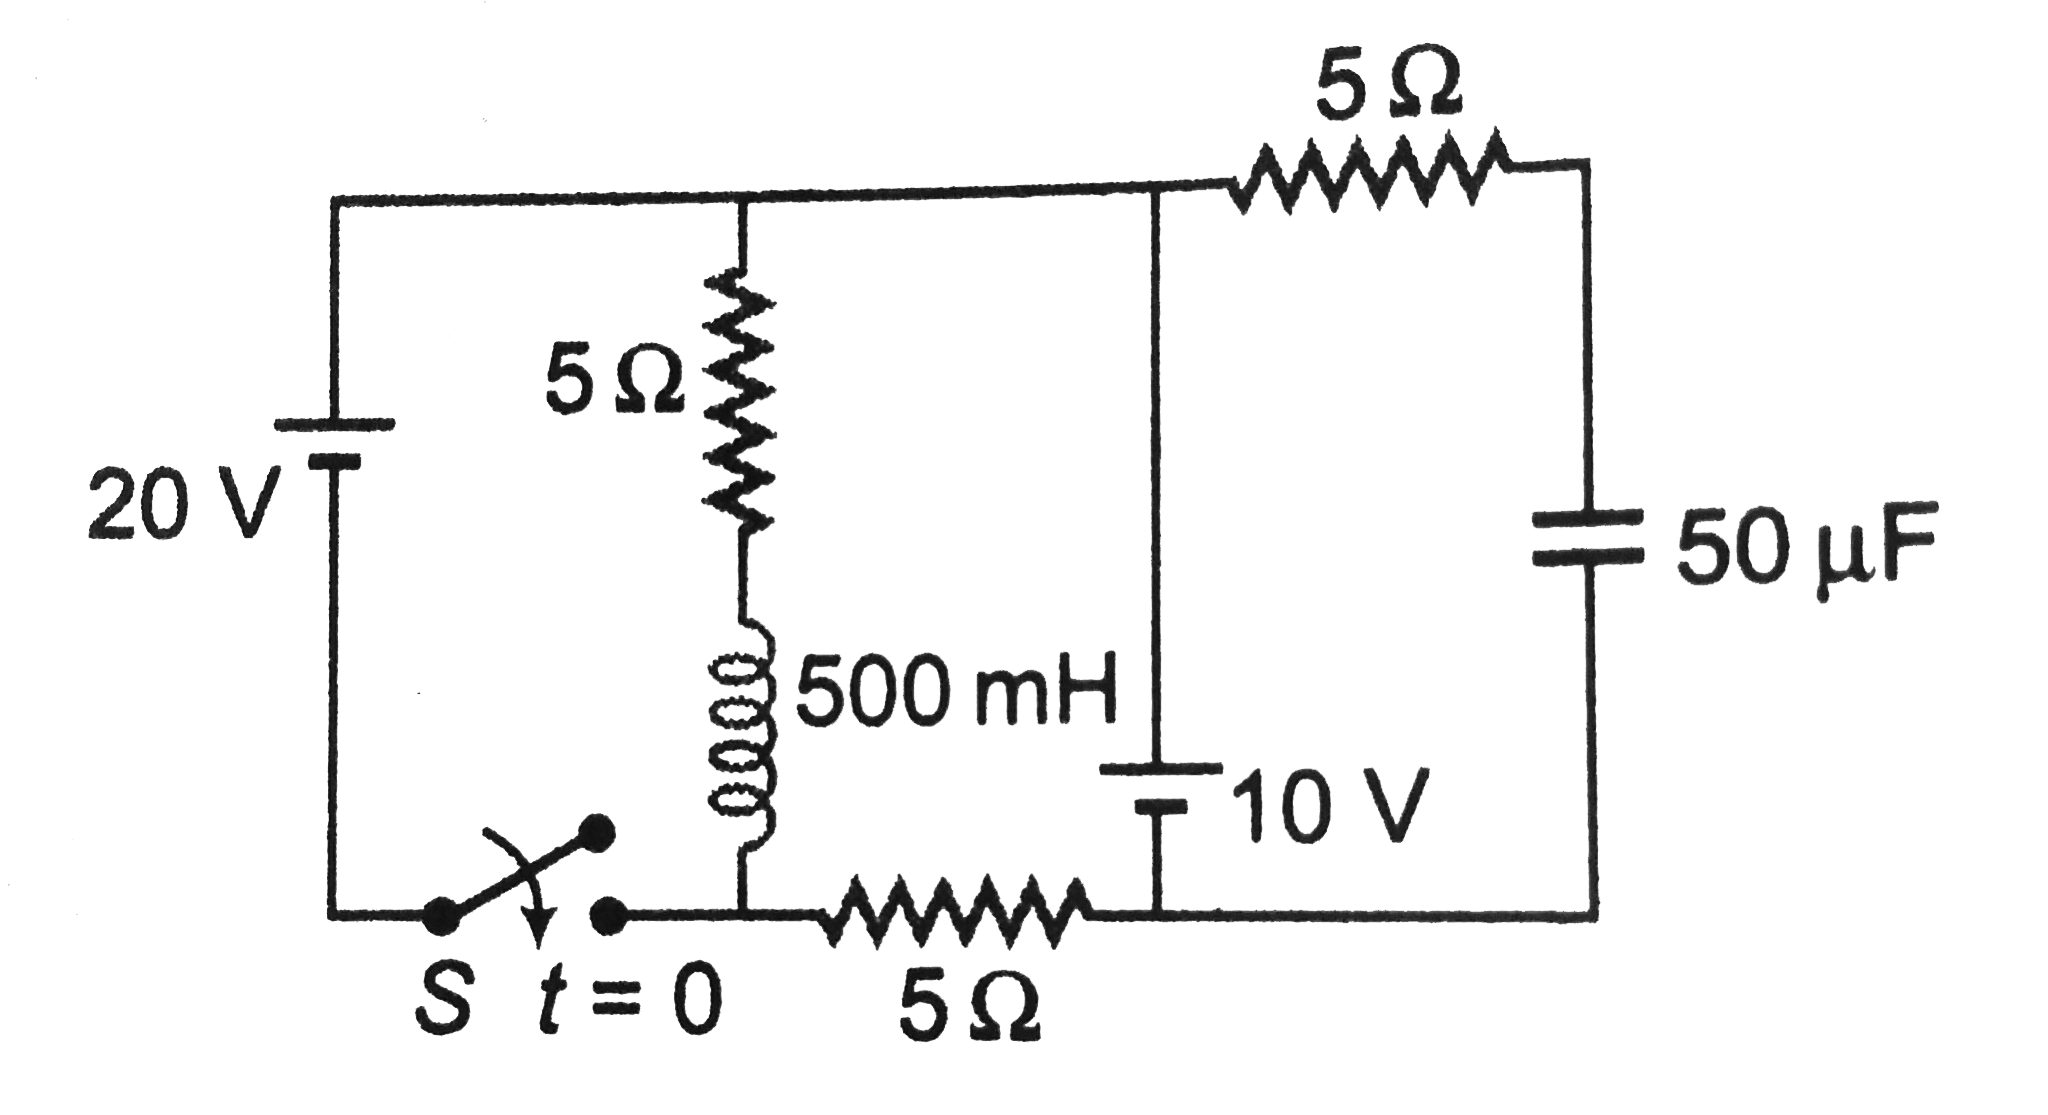 Switch S is closed t=0, in the circuit shown. The change in flux in the inductor (L=500mH) from t=0 to an instant when it reaches steady state is